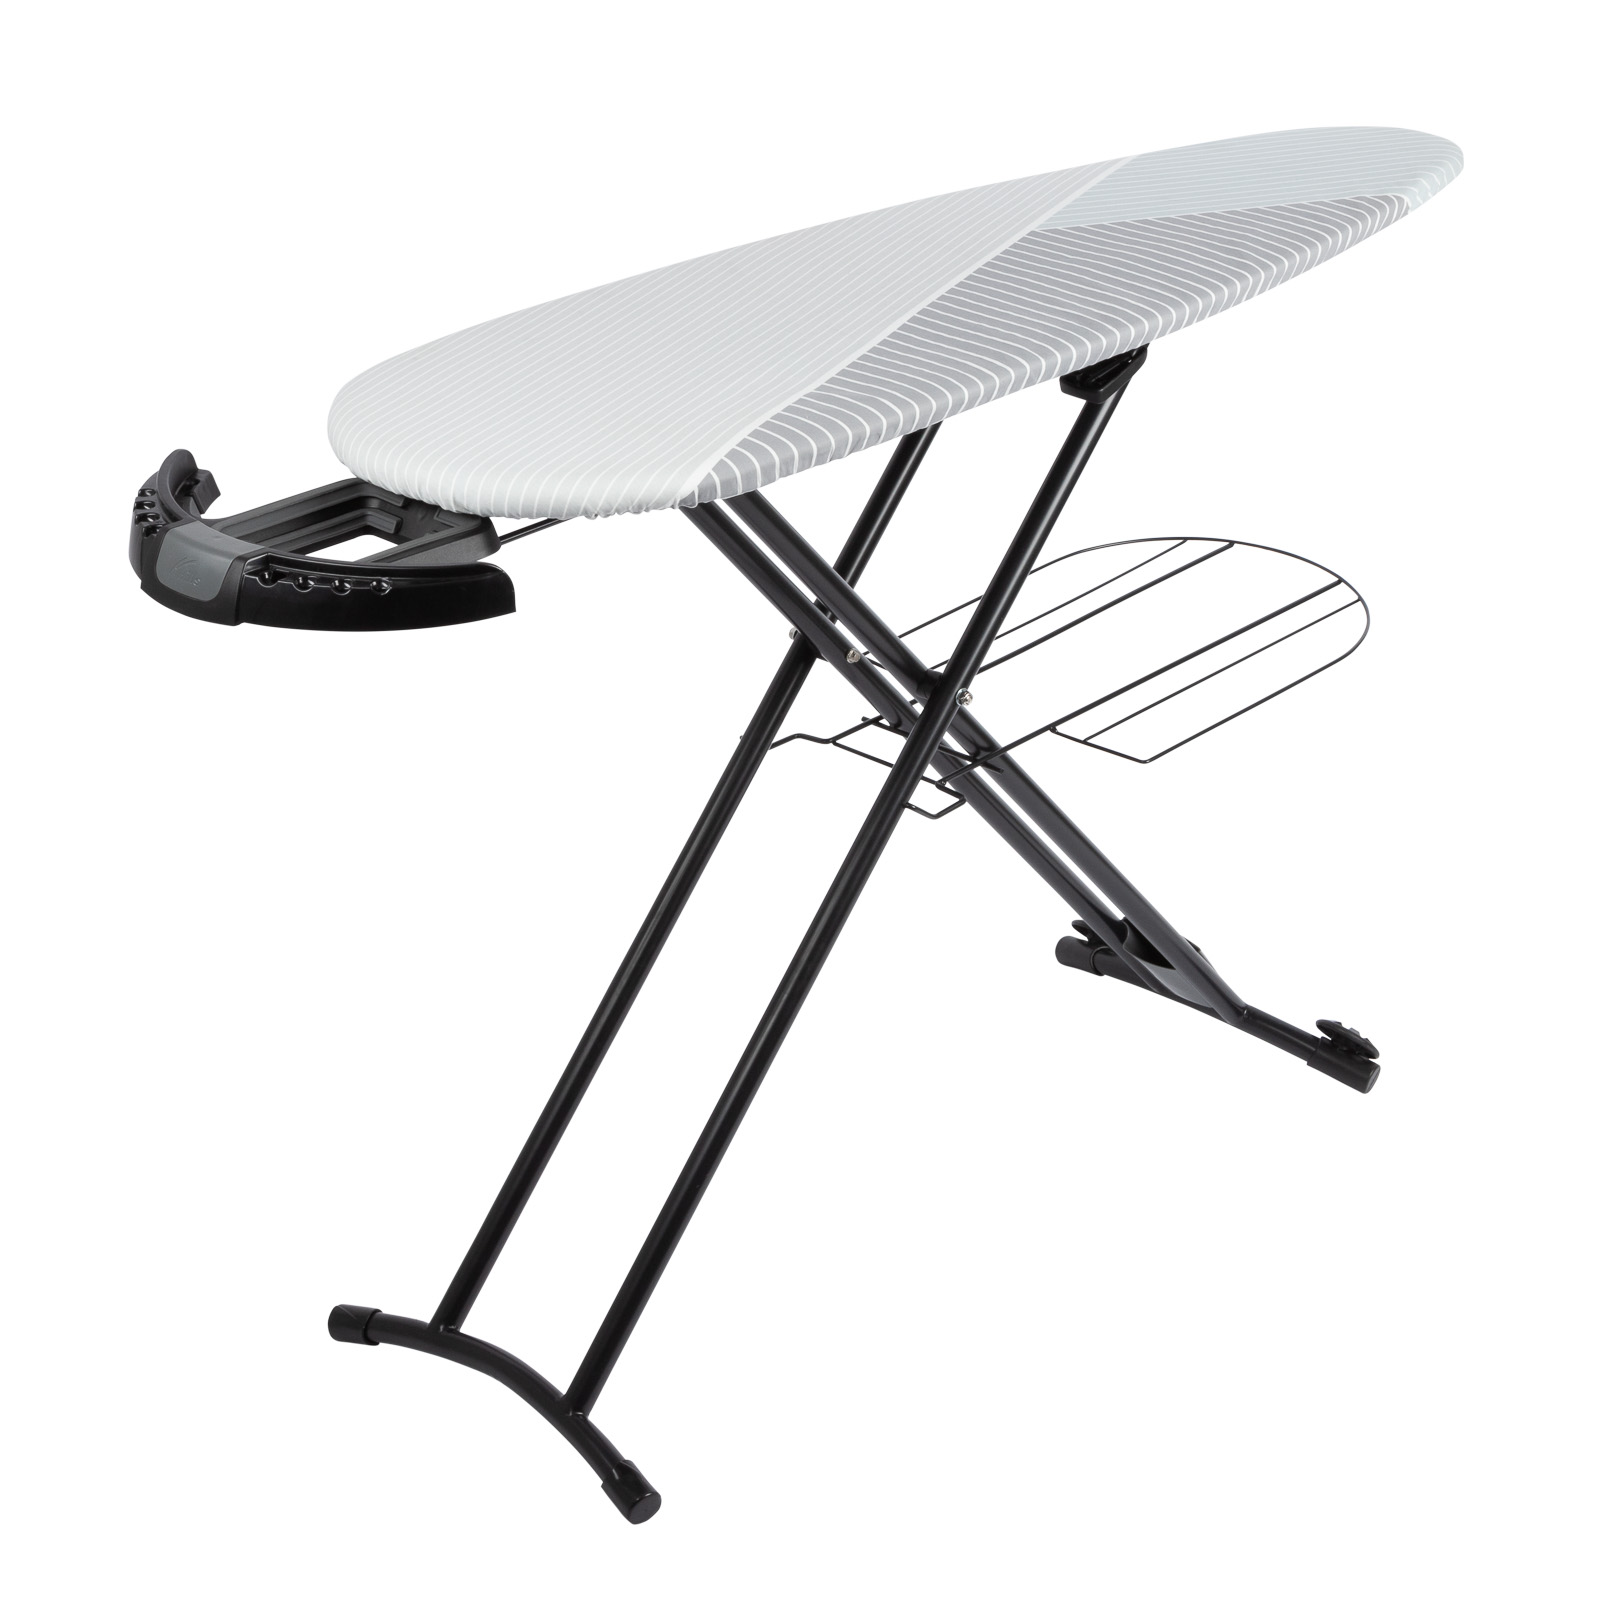 Who Makes The Best Ironing Board?